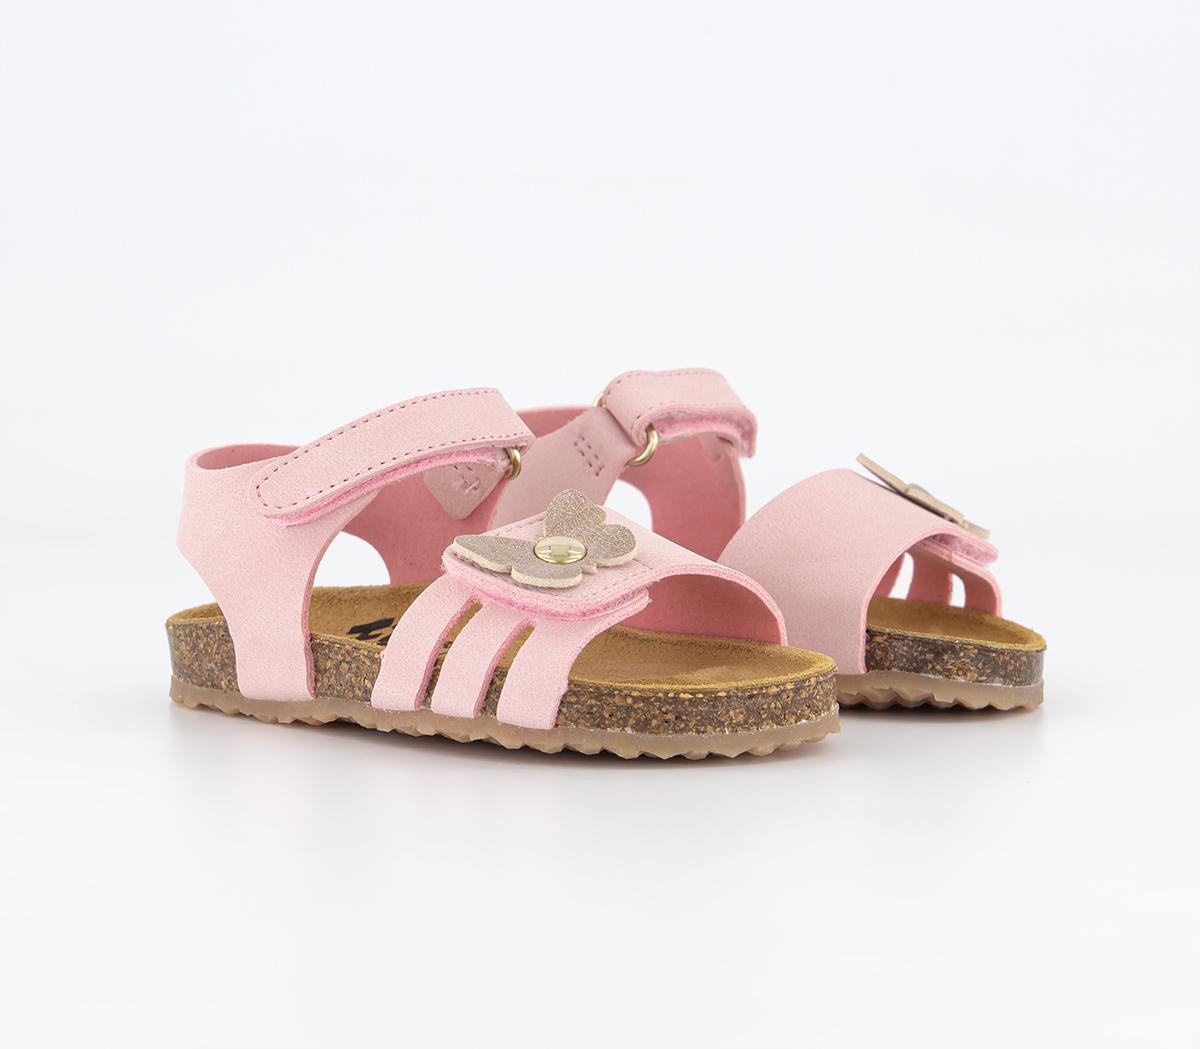 Earthchild Kids Earth Child Butterfly Velcro Sandals Pink, 4infant